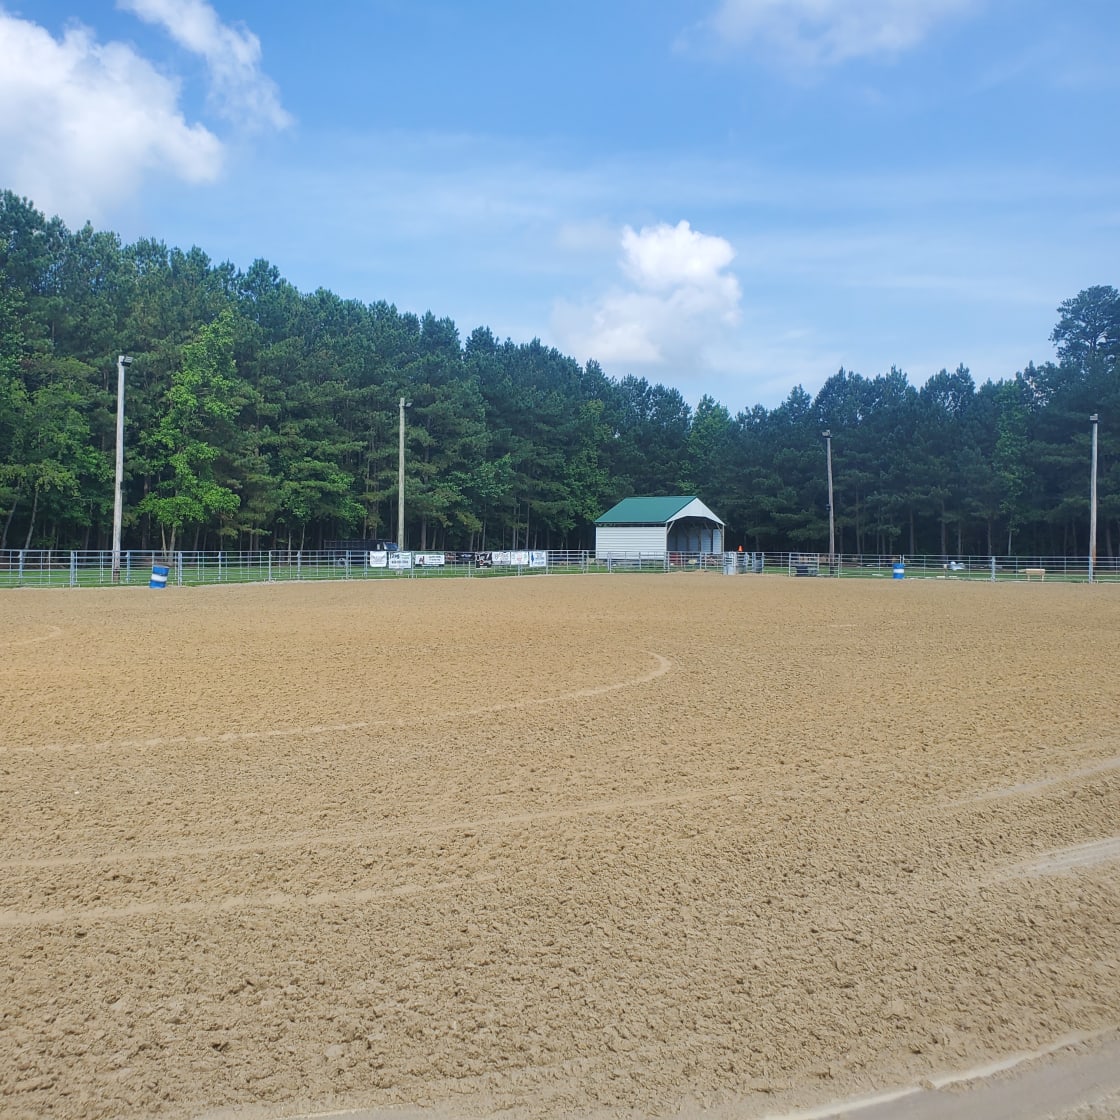 The western arena